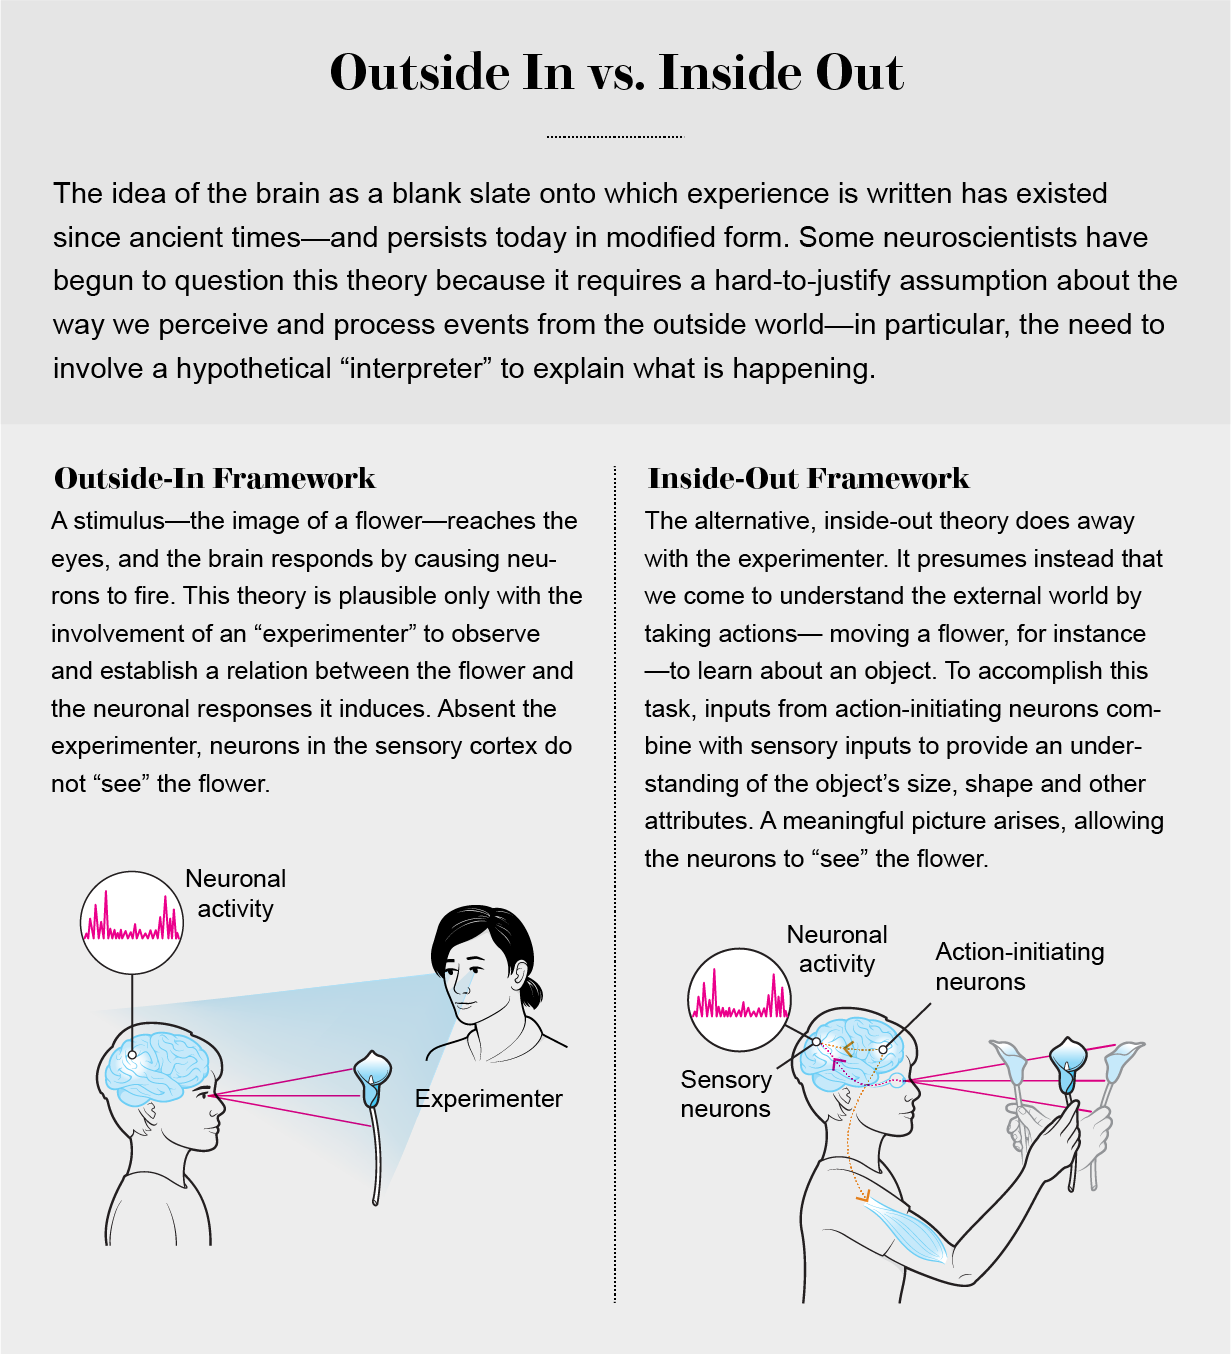 Graphic explains outside-in versus inside-out framework using the example of how neurons in the brain might “see” a flower.